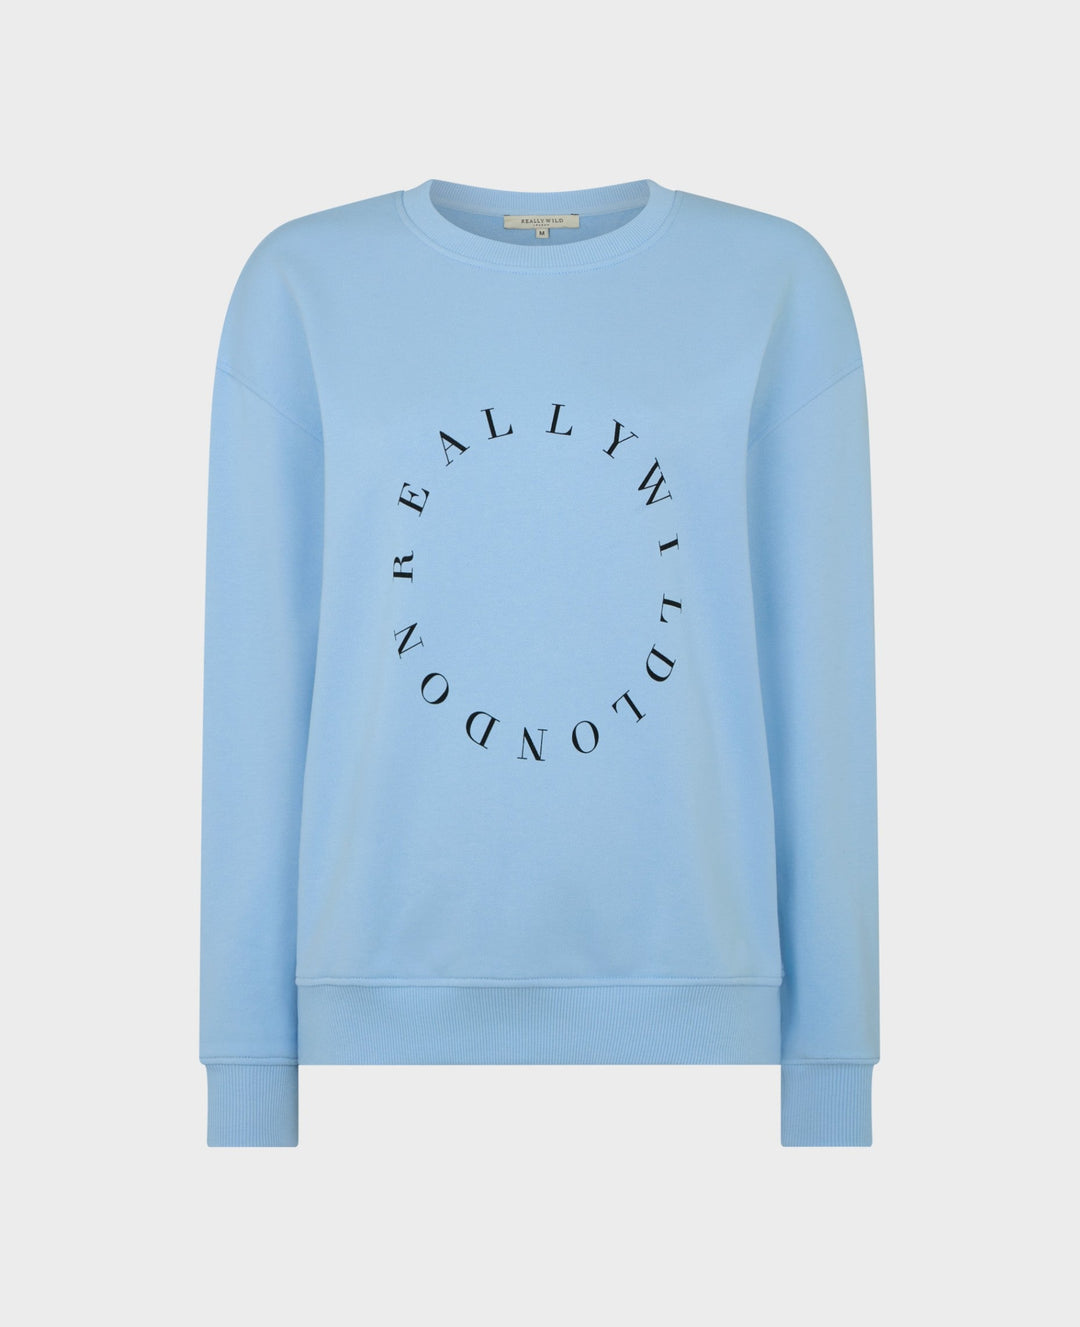 Our Really Wild logo print sweatshirt comes in 100% organic cotton and in pale blue. Perfect for pairing with denim.